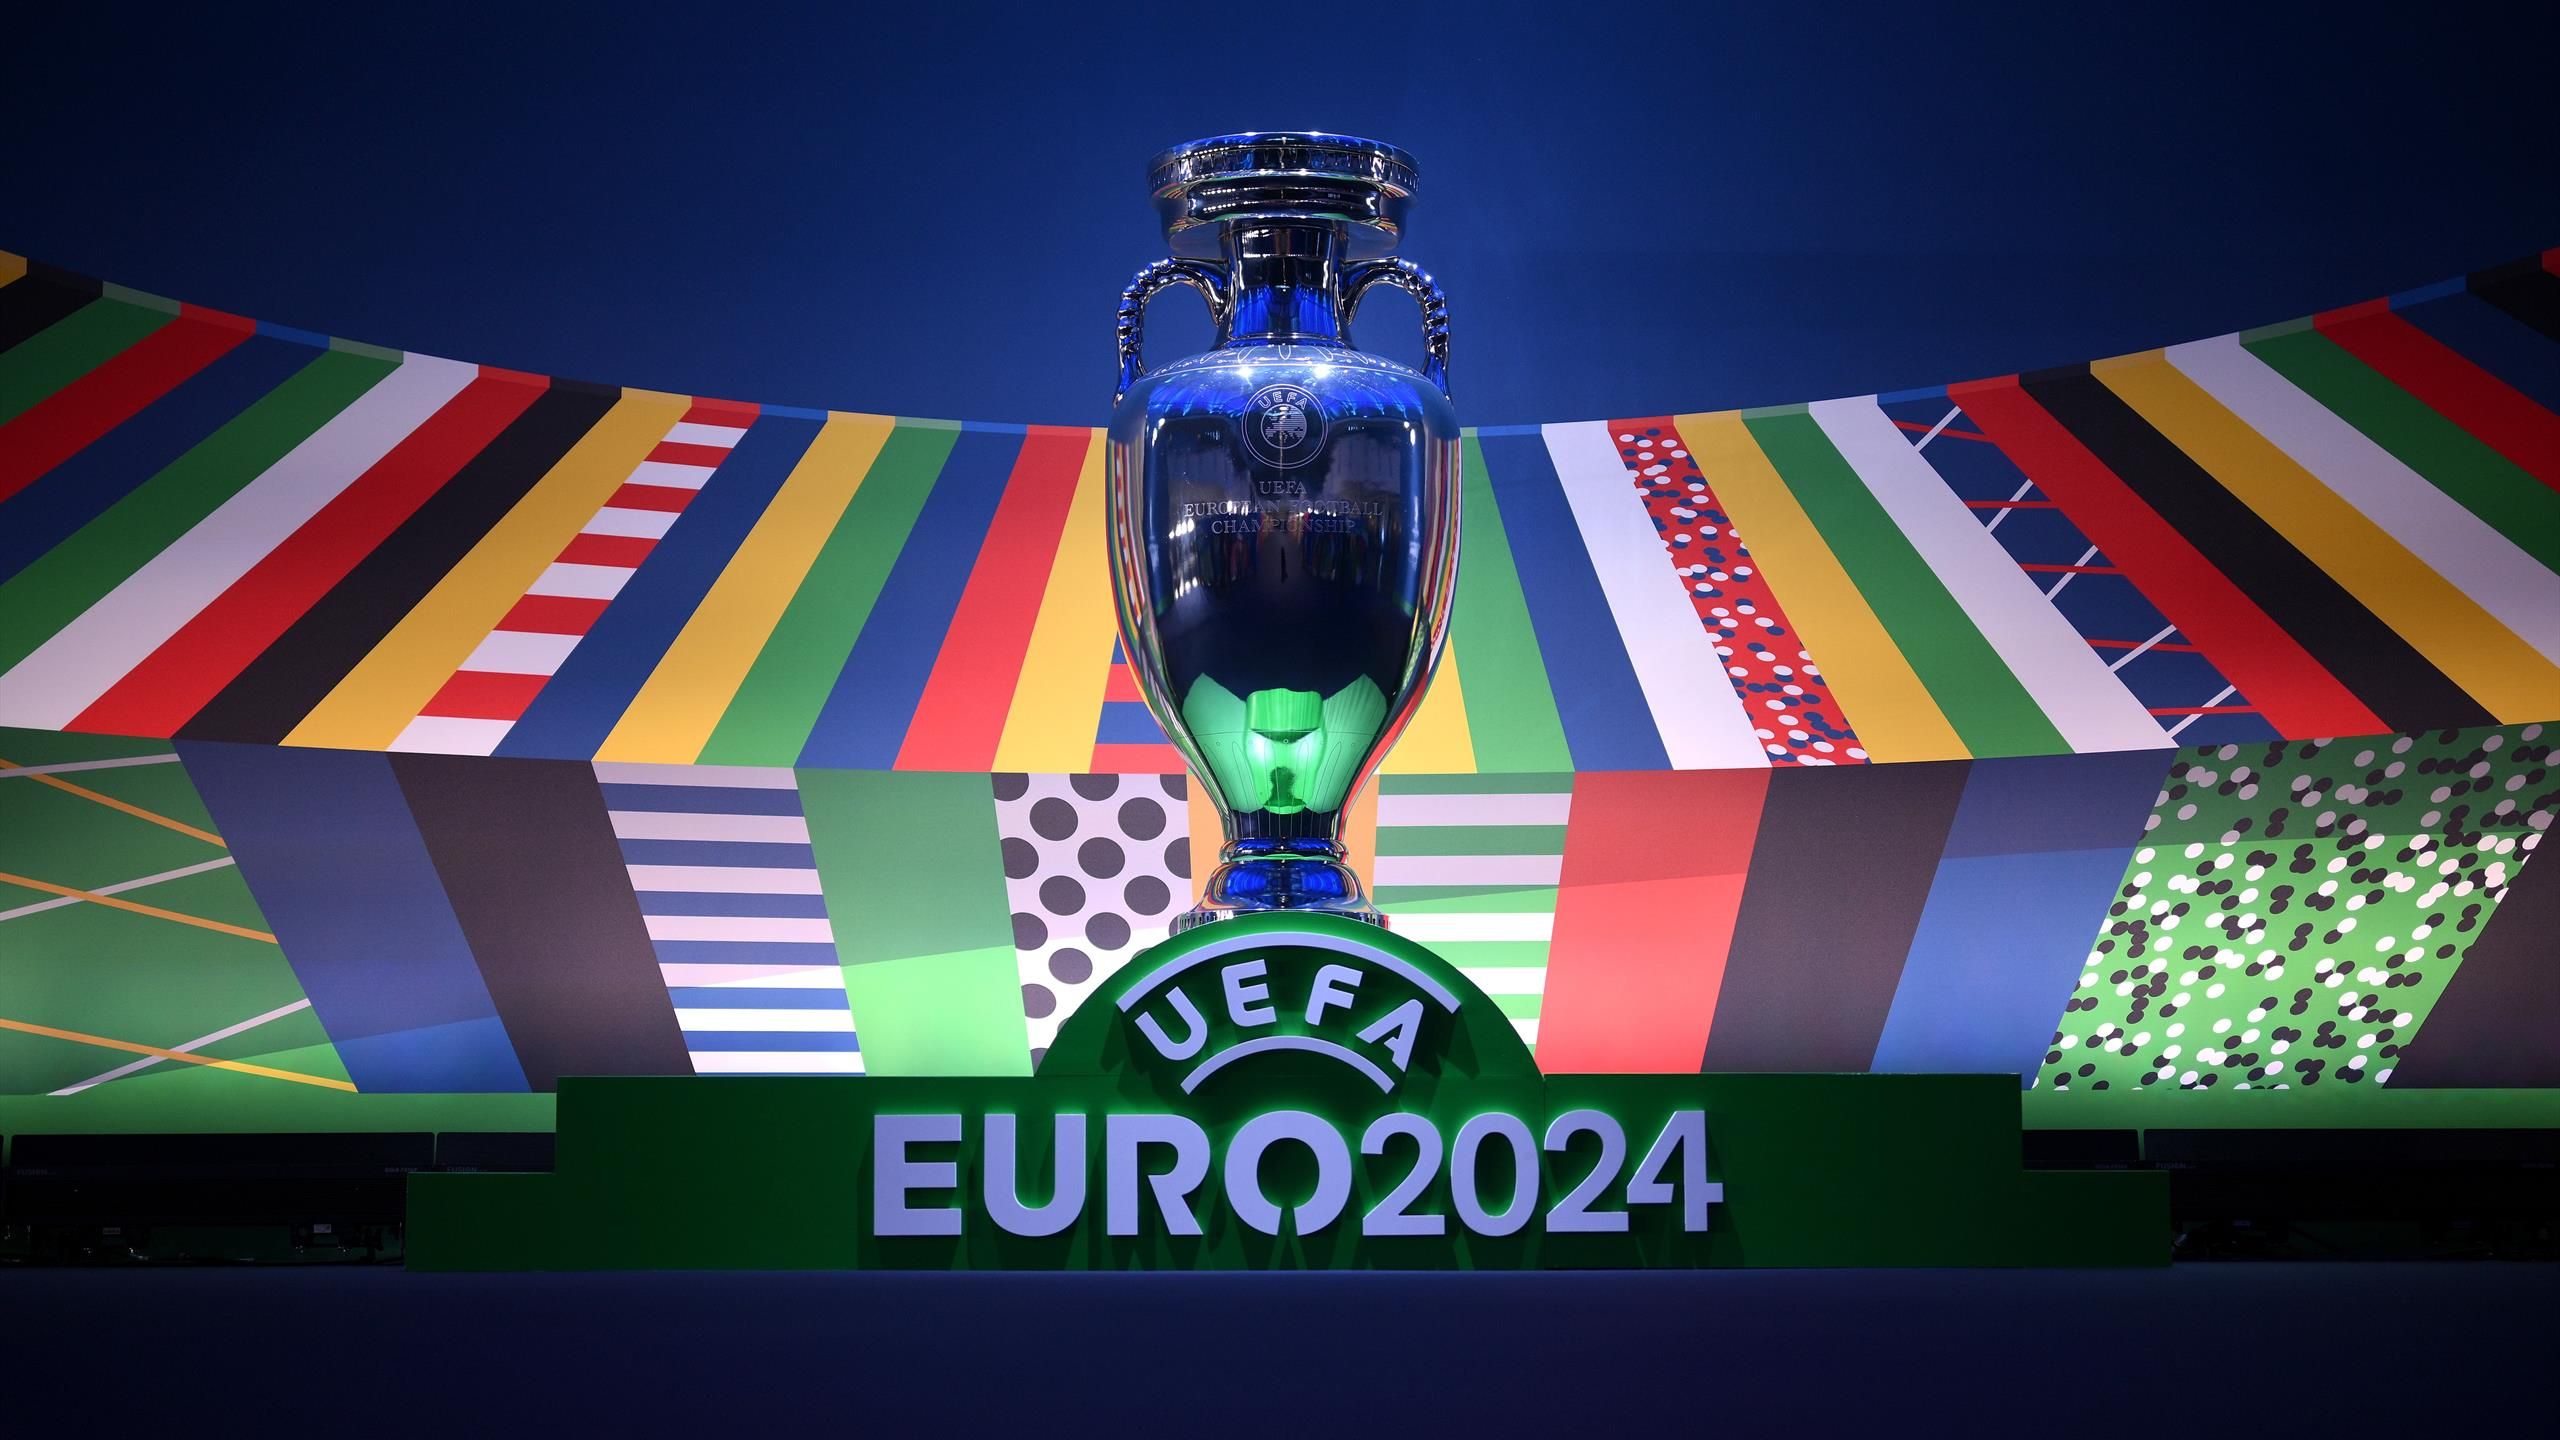 EURO 2024 brings new investment opportunities Key industries and